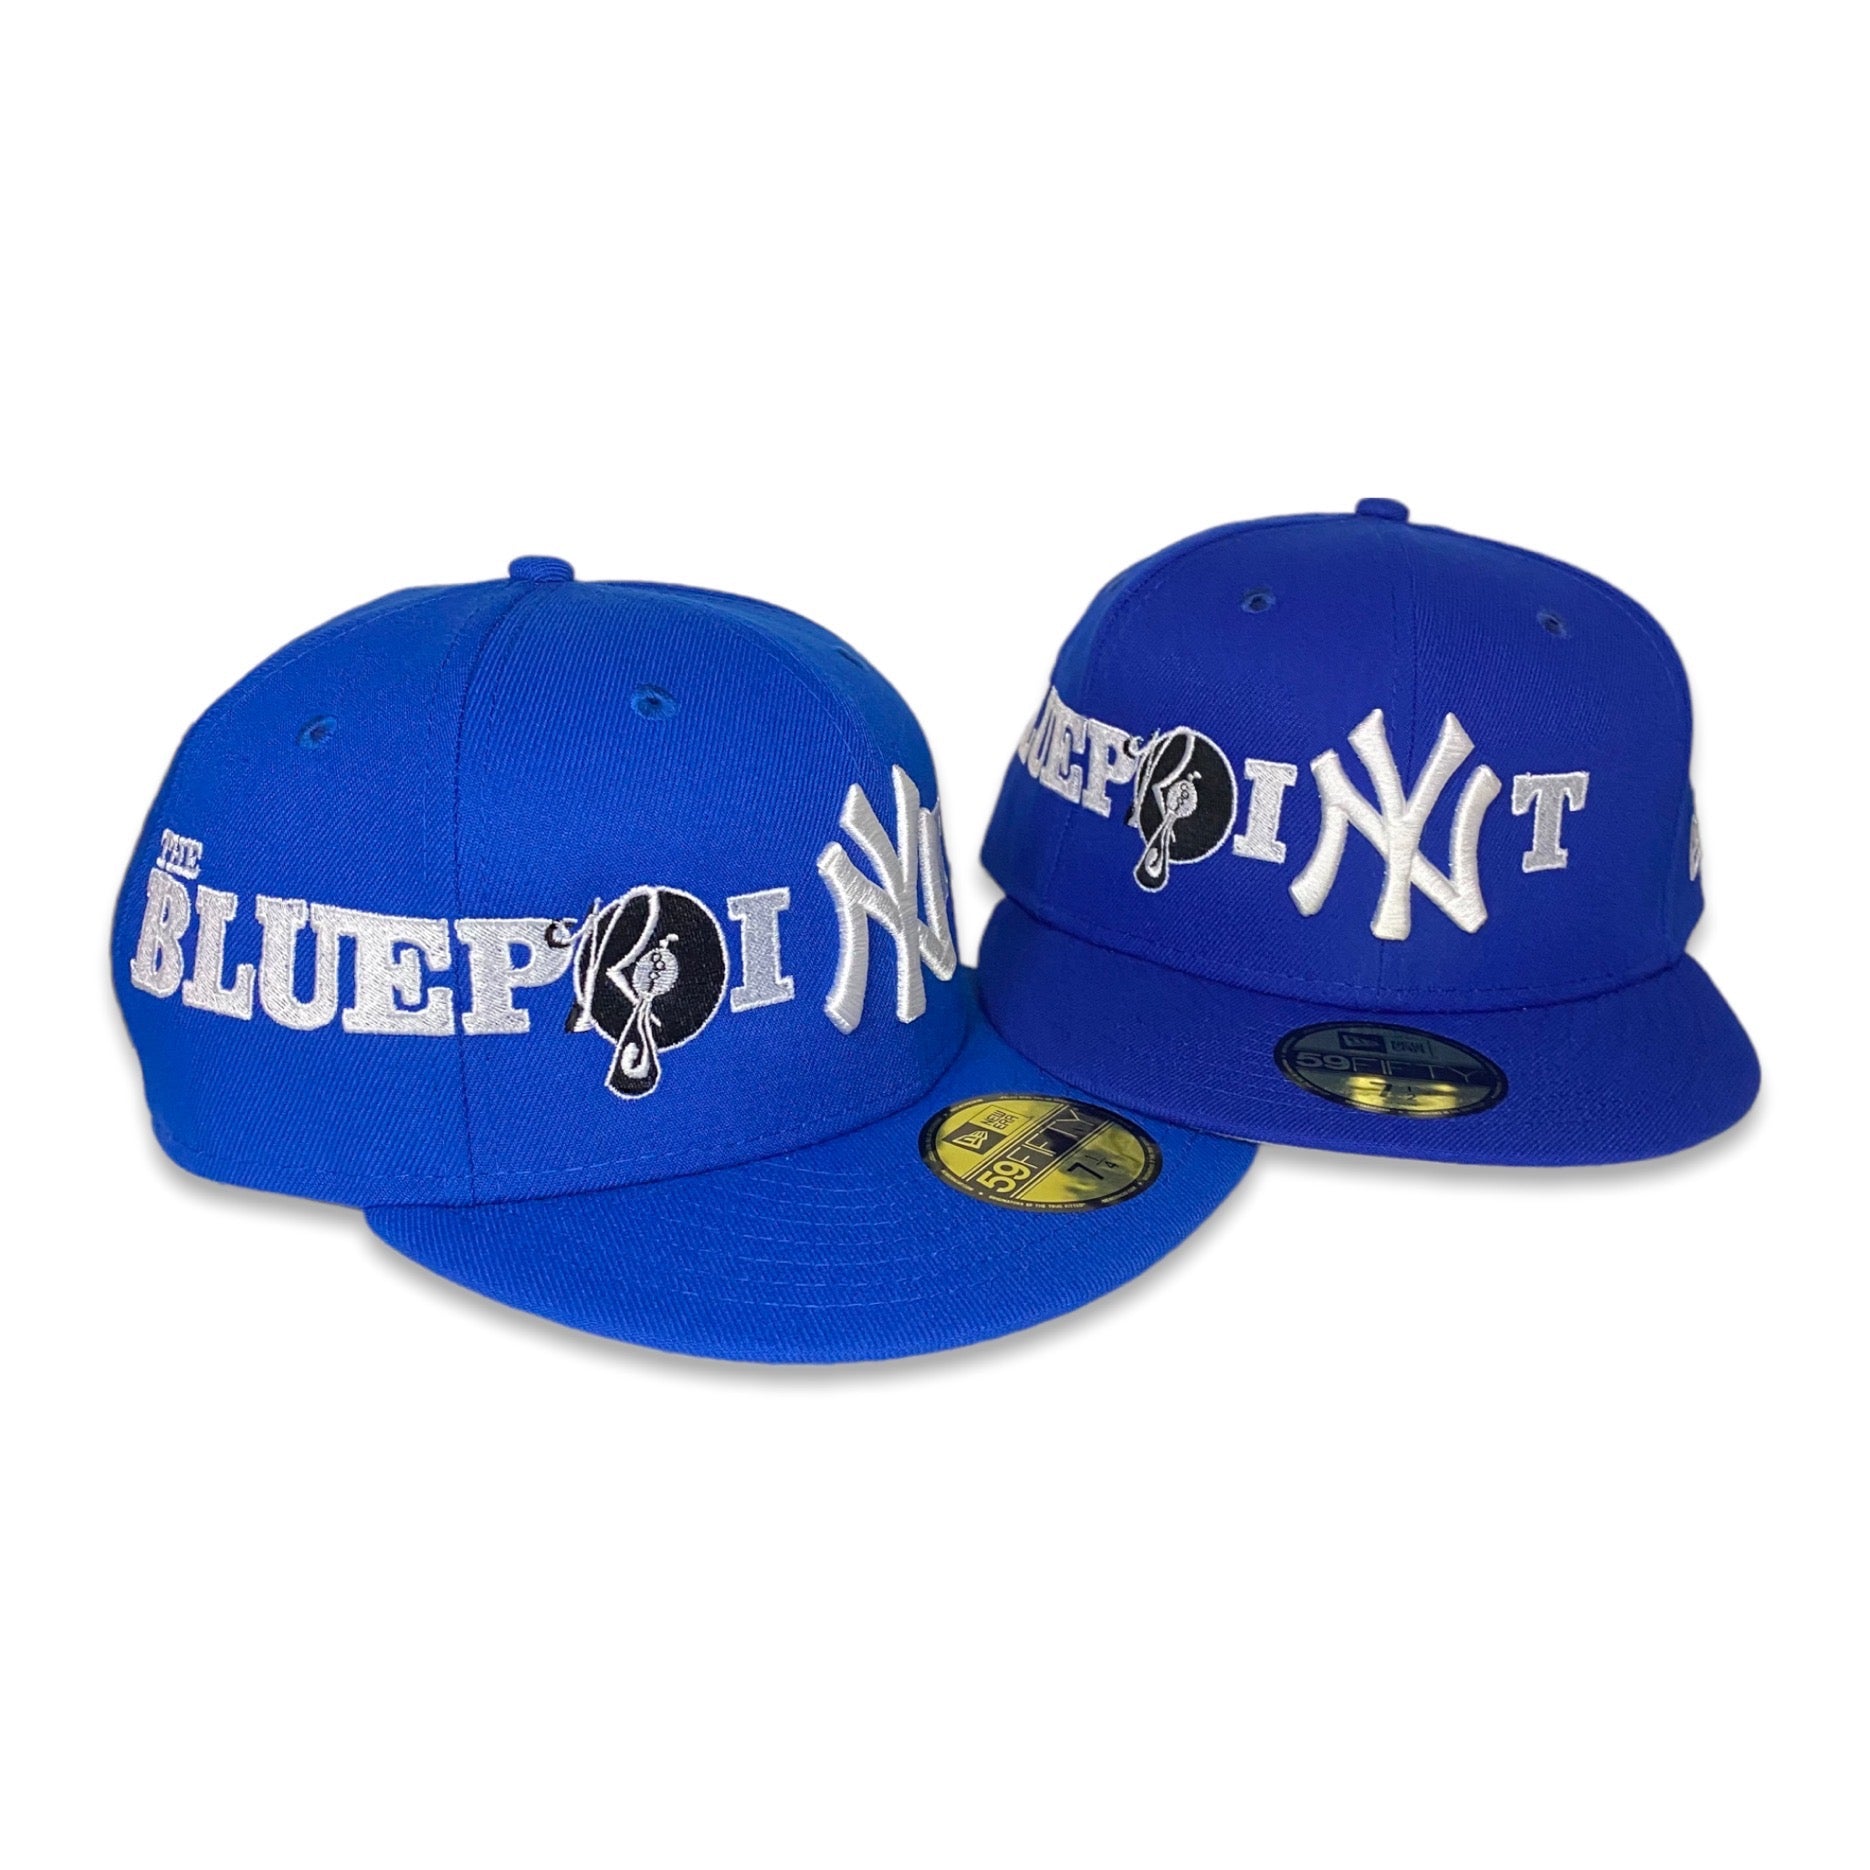 New Era Paper Planes Rock Nation Jay Z Men's Hat Fitted Cap 59Fifty  Blue #694